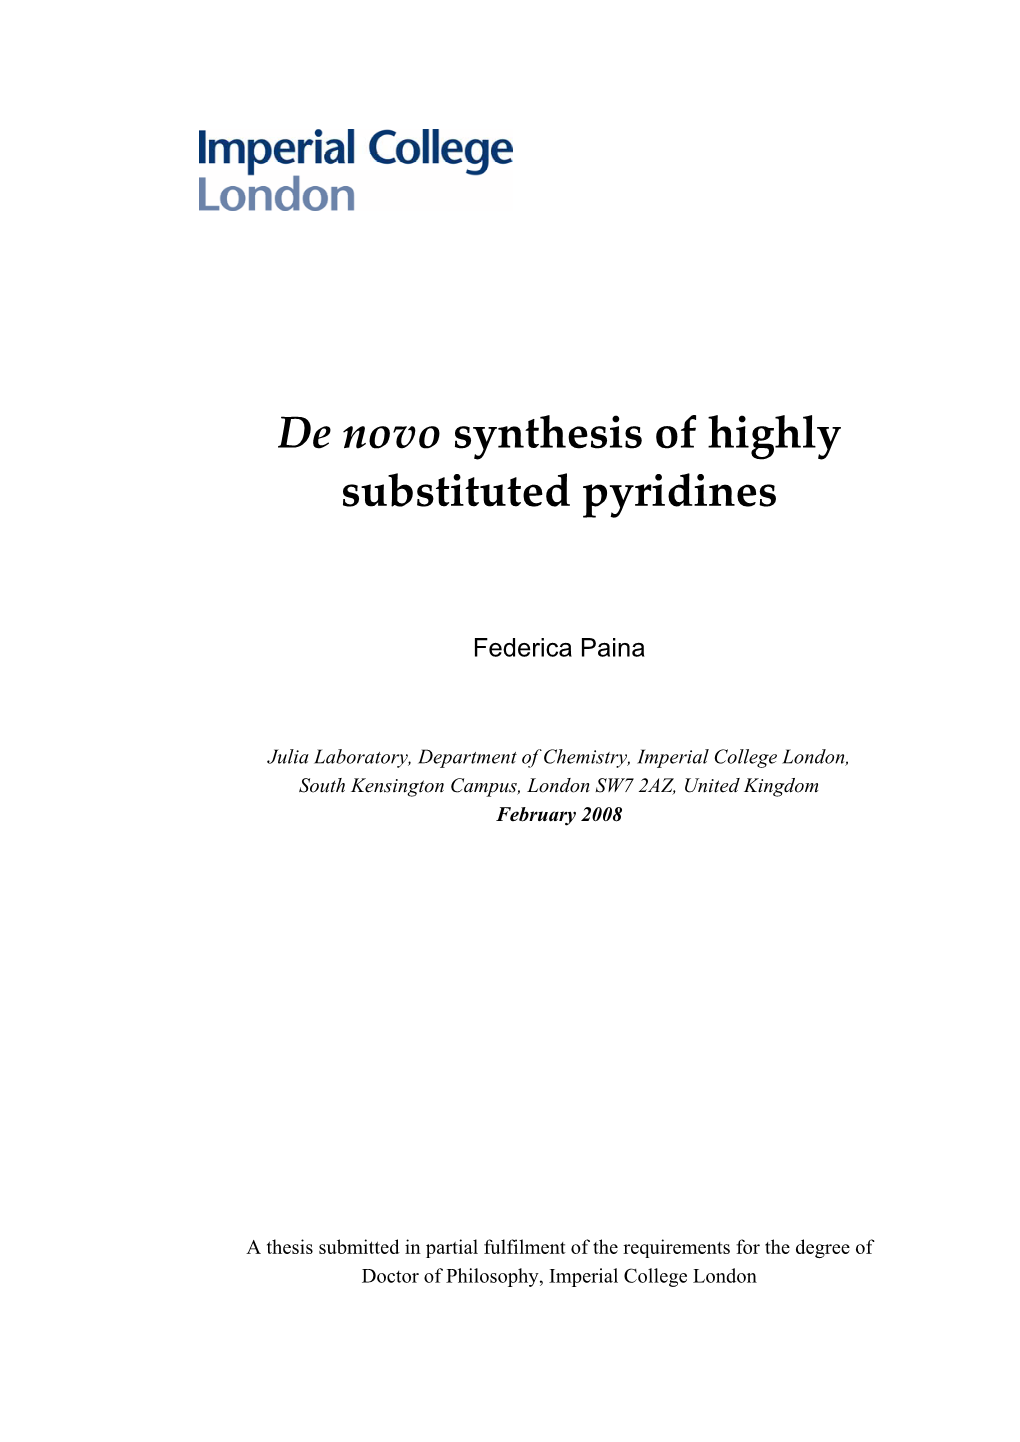 De Novo Synthesis of Highly Substituted Pyridines